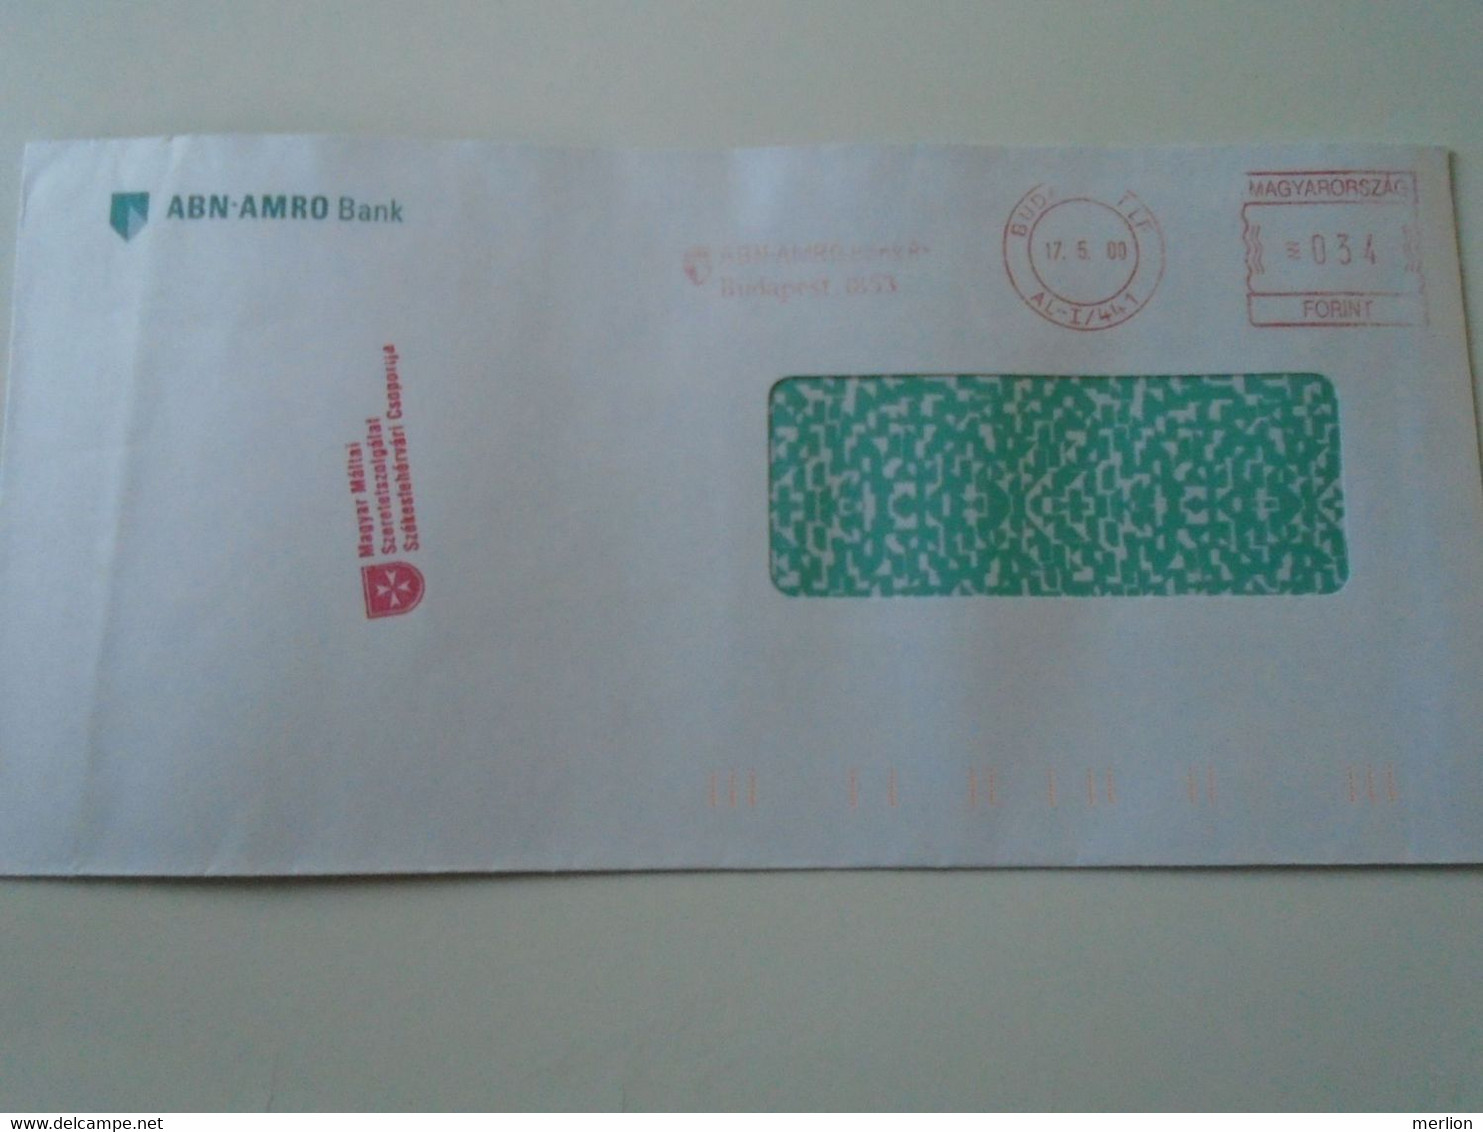 AD00012.116  Hungary Cover  -EMA Red Meter Freistempel-  Ca 2000   Budapest  ABN AMRO  Bank - Maltese Charity Service - Automatenmarken [ATM]